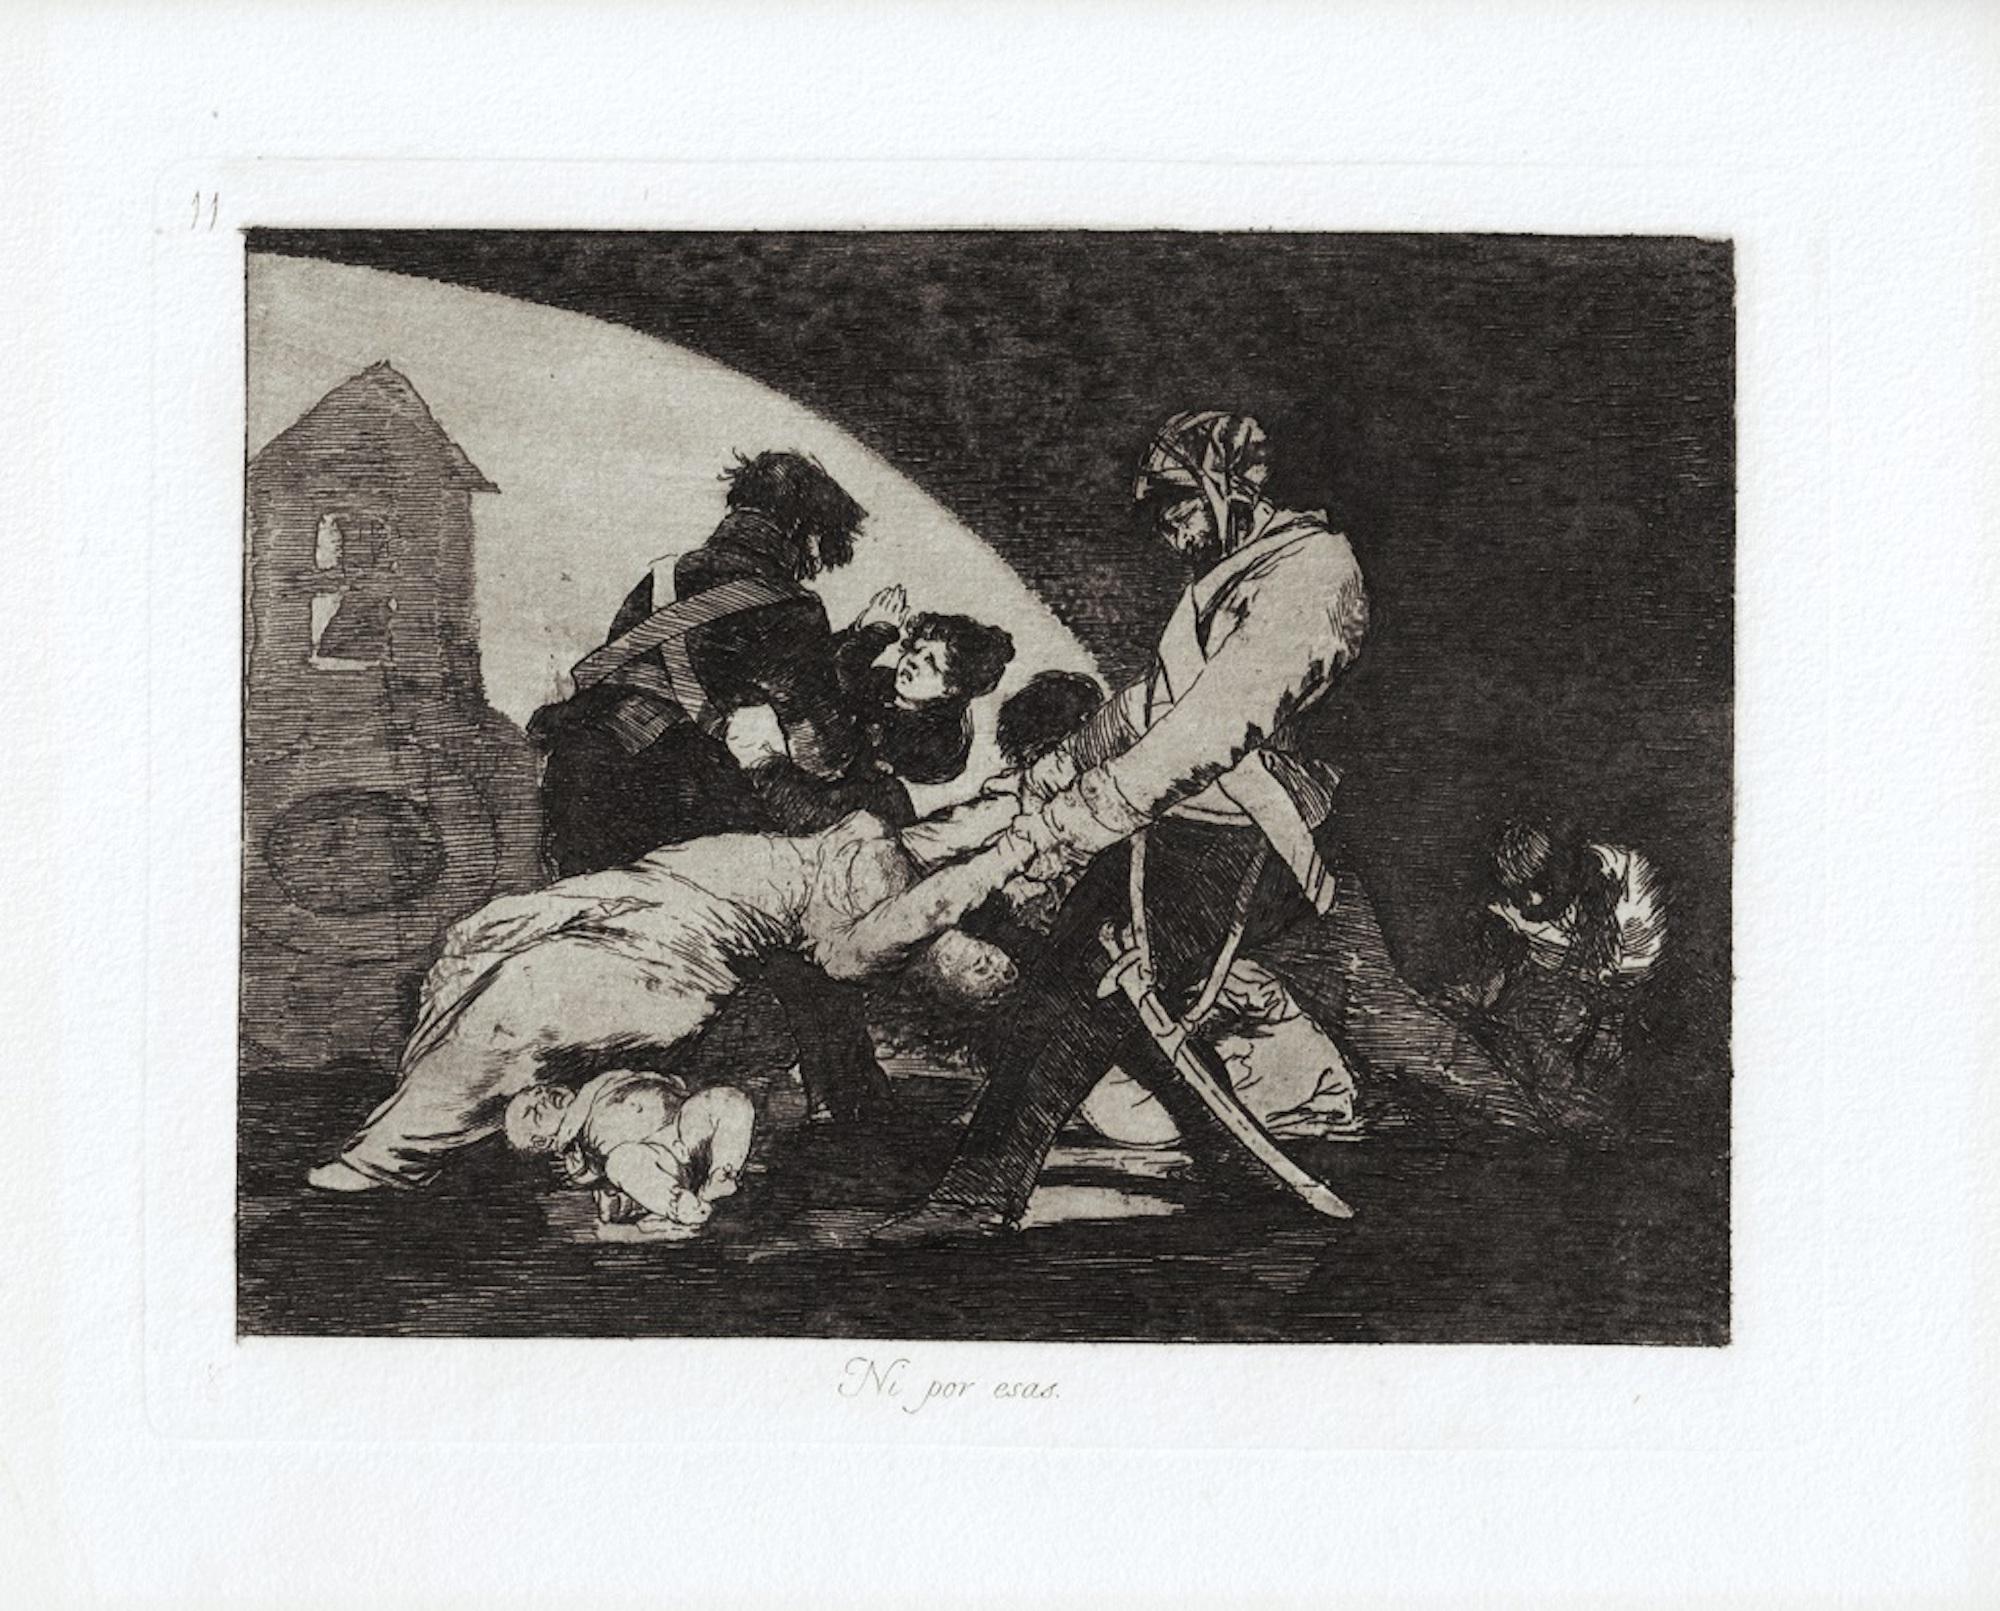 Ni Por esas is an original artwork realized by the great Spanish artist Francisco Goya in 1810. 

Original Etching on paper. 

The artwork belongs to the famous series "Los Desastres de la Guerra" realized during the years of the Independence